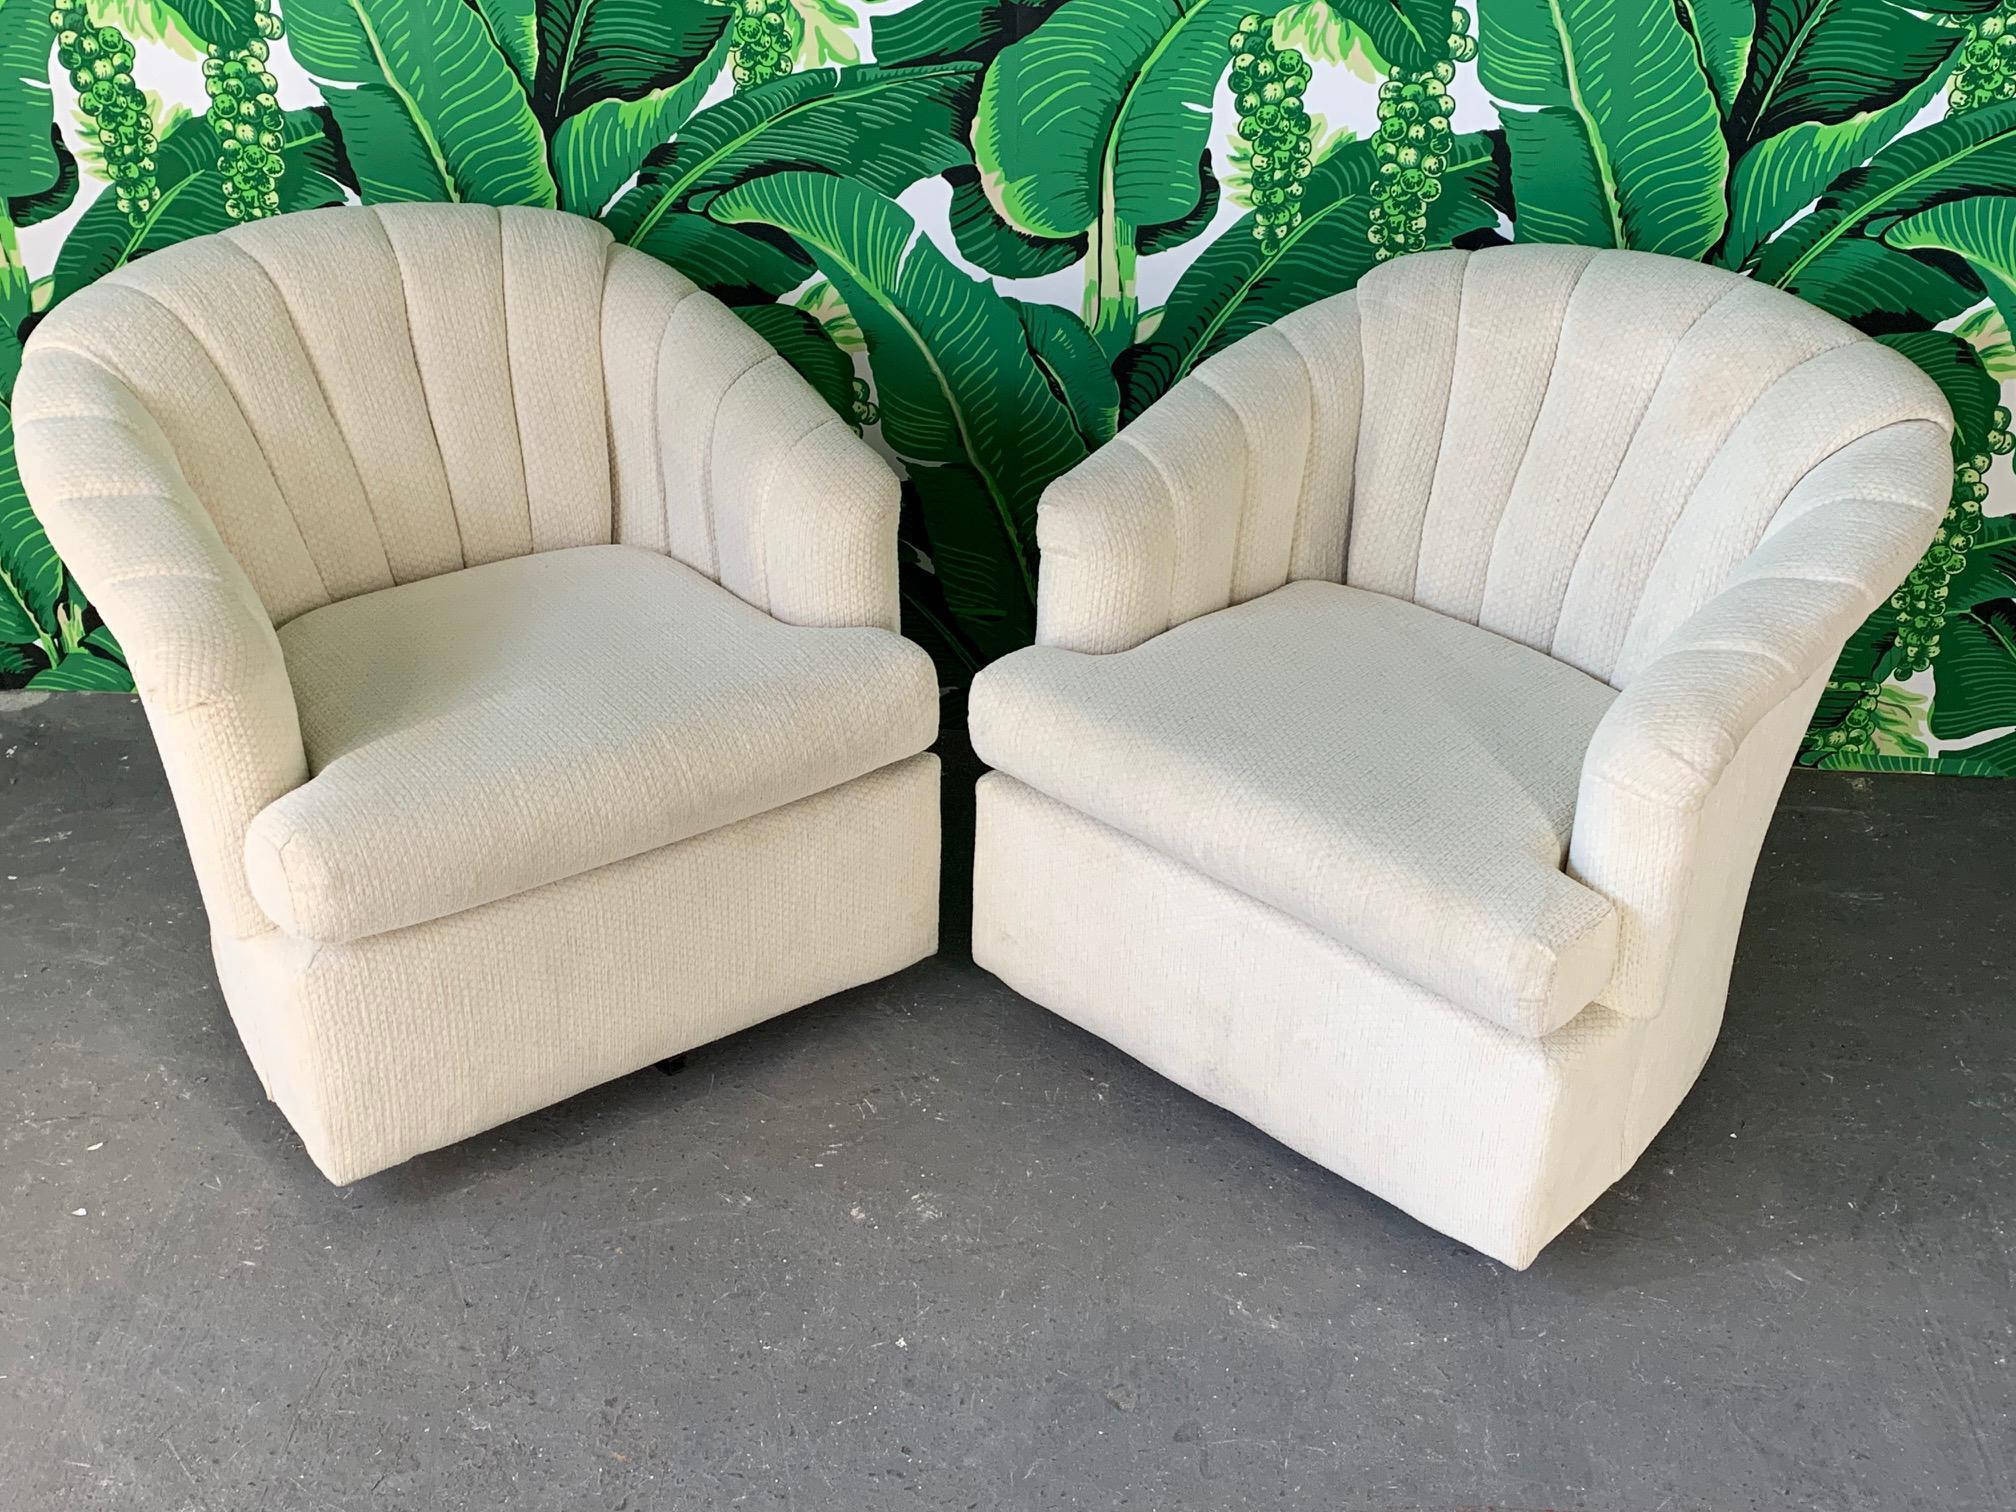 Hollywood Regency Vintage Channel Back Tufted Swivel Chairs, a Pair